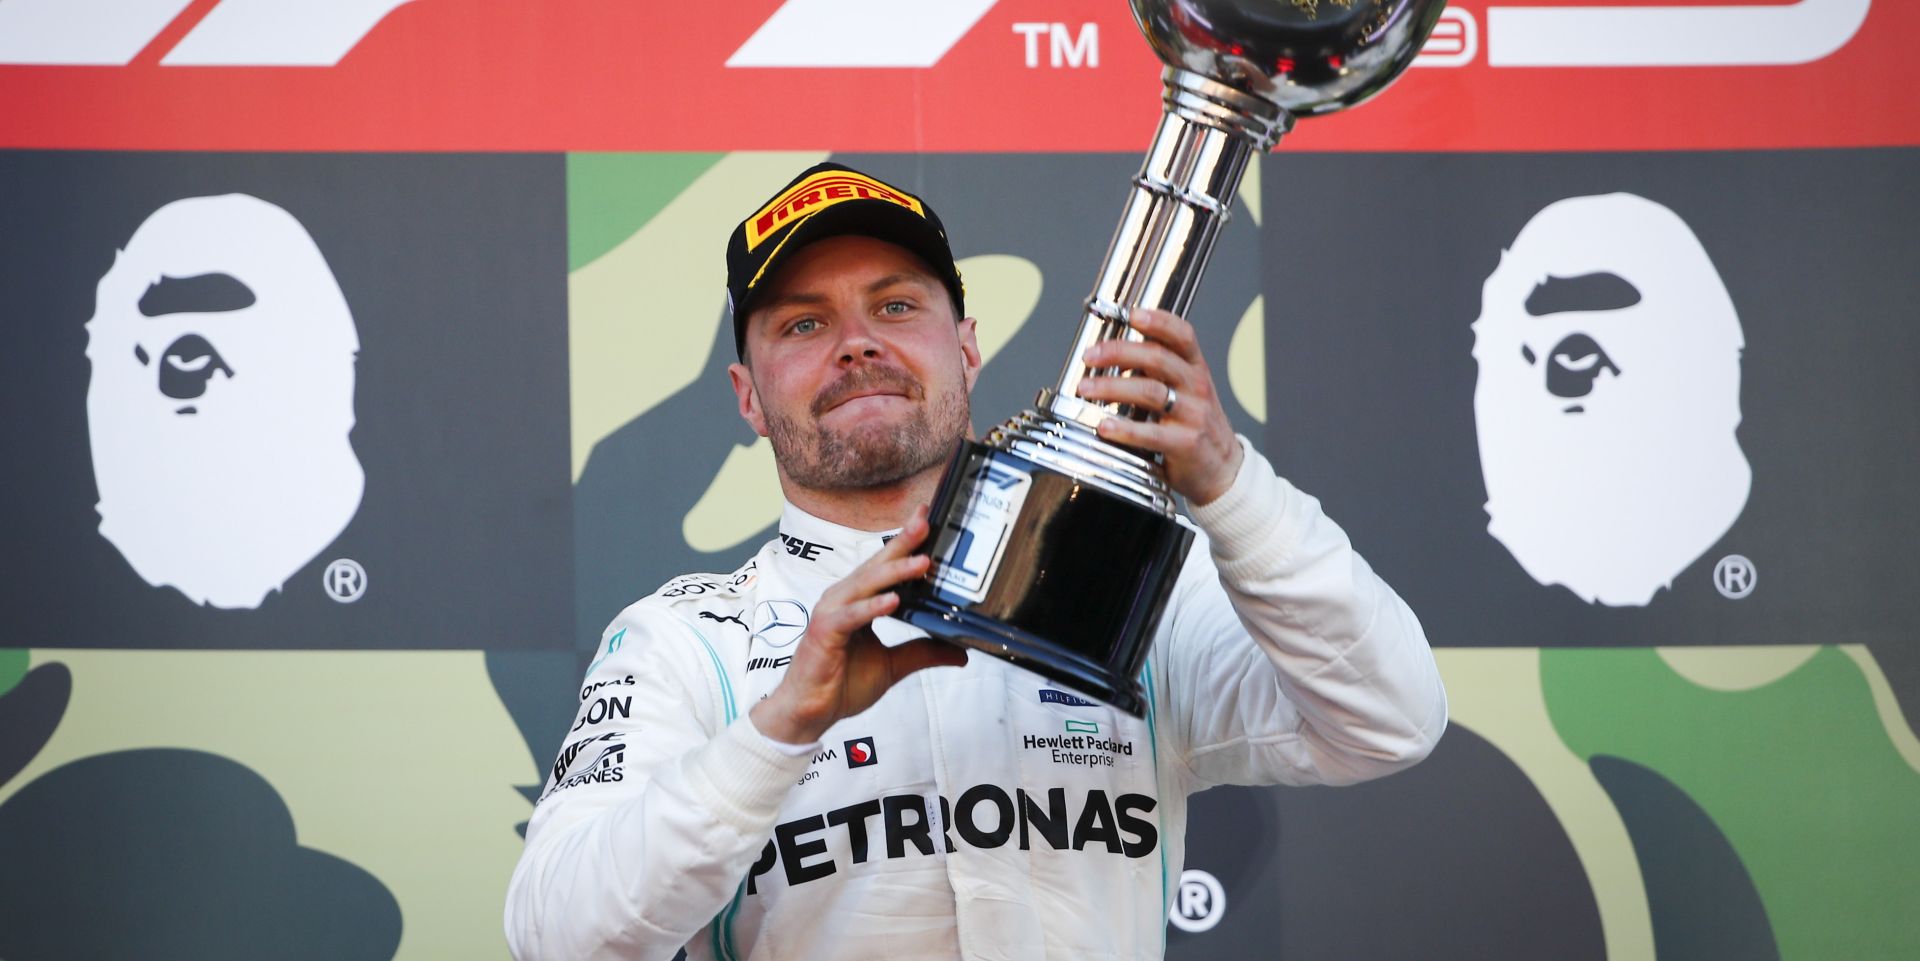 epa08480439 (FILE) -  Finnish Formula One driver Valtteri Bottas of Mercedes AMG GP celebrates on the podium with his trophy after winning the Japanese Formula One Grand Prix in Suzuka, Japan, 13 October 2019 (re-issued on 12 June 2020). On 12 June 2020 the FIA (Federation Internationale de l'Automobile) announced that the 2020 Formula One Grand Prix of Japan, as well of the Azerbaijan Grand Prix and Singapore Grand Prix have been cancelled 'As a result of the ongoing challenges presented by COVID-19'.  EPA/DIEGO AZUBEL *** Local Caption *** 55544199